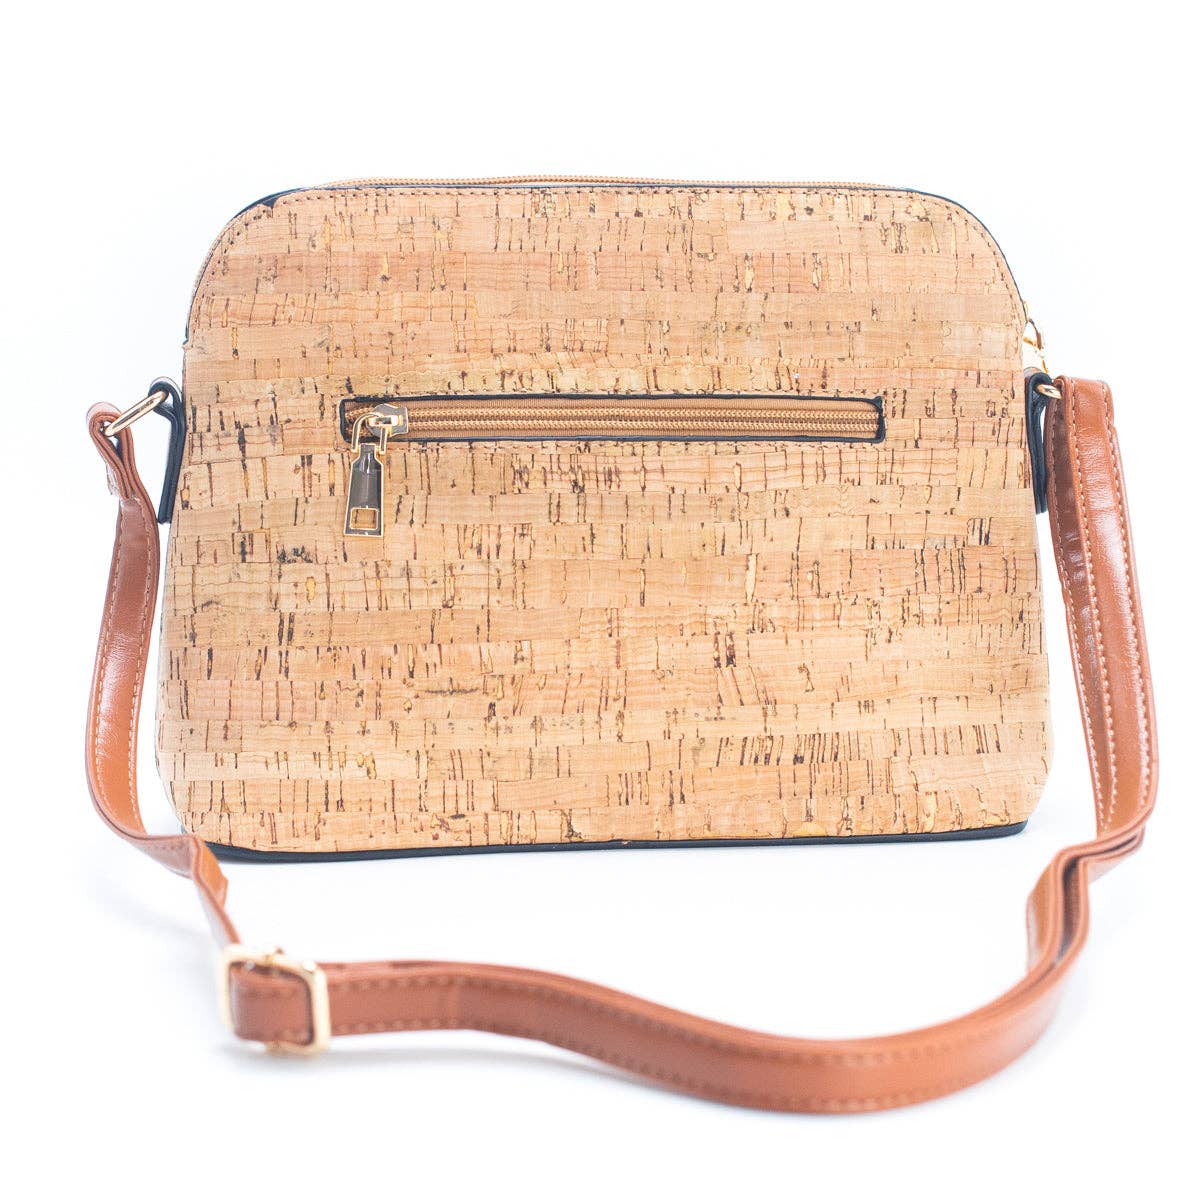 ICork Lady's Crossbody Bag w/ Stylish Floral Print & Diagonal Zipper Accents | THE CORK COLLECTIONmg